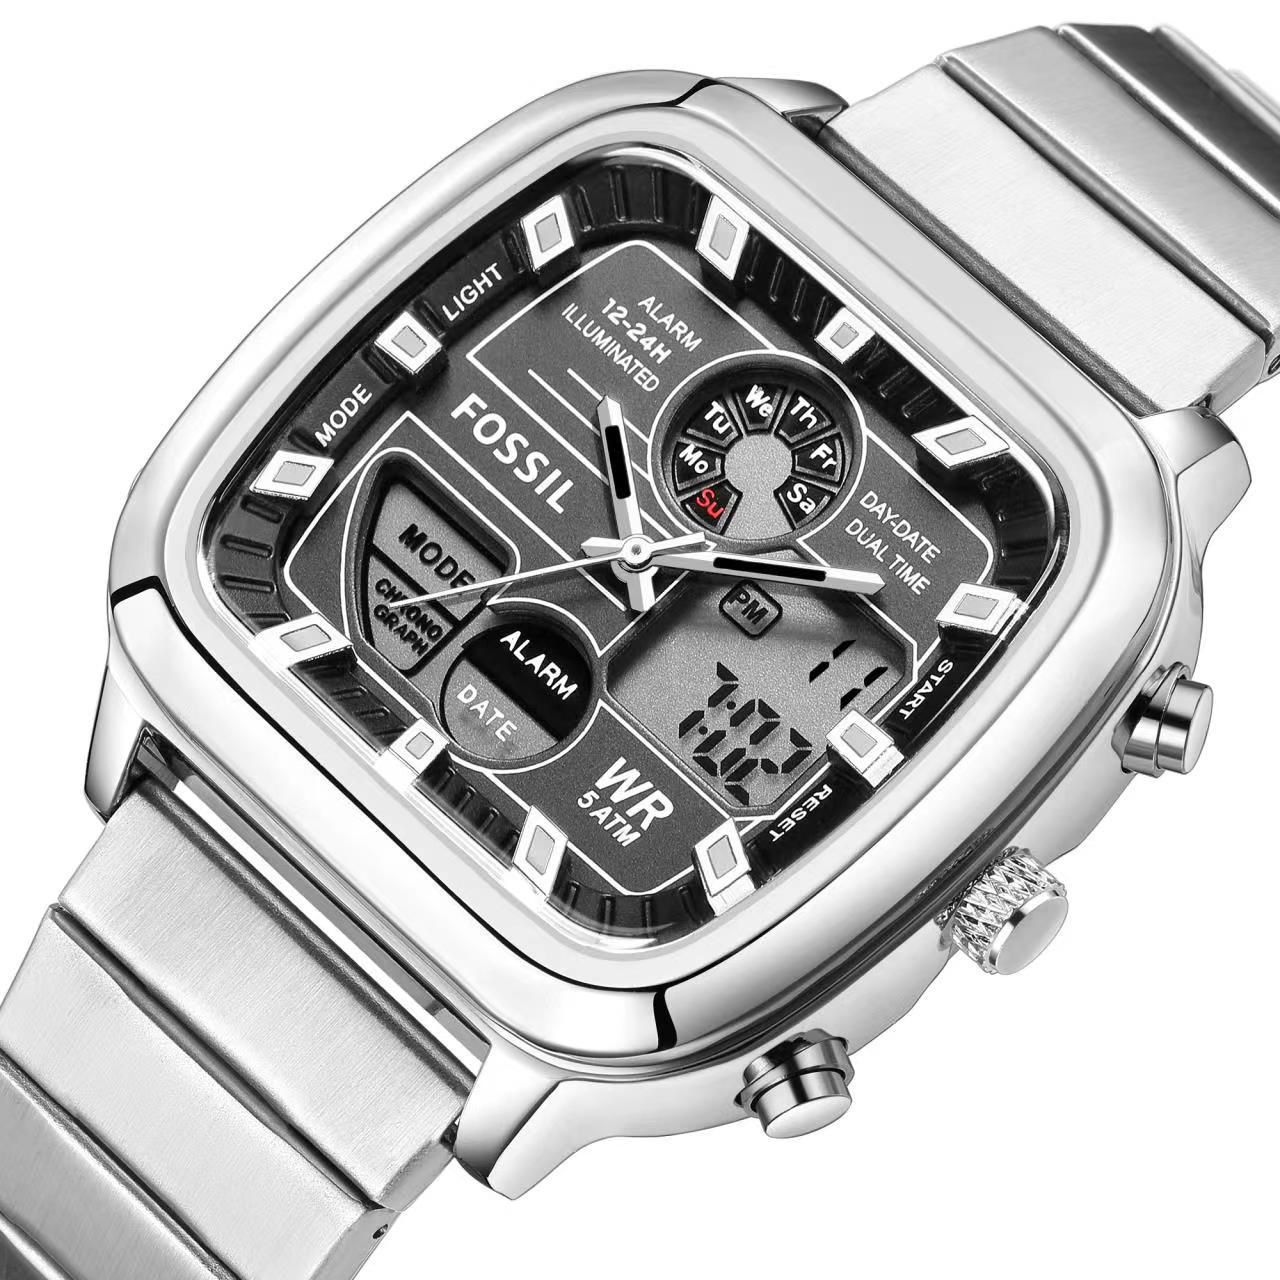 Hot selling New Model Men's Fossil  Analog-Digital Watch in uniquely designed to provide artistic balance